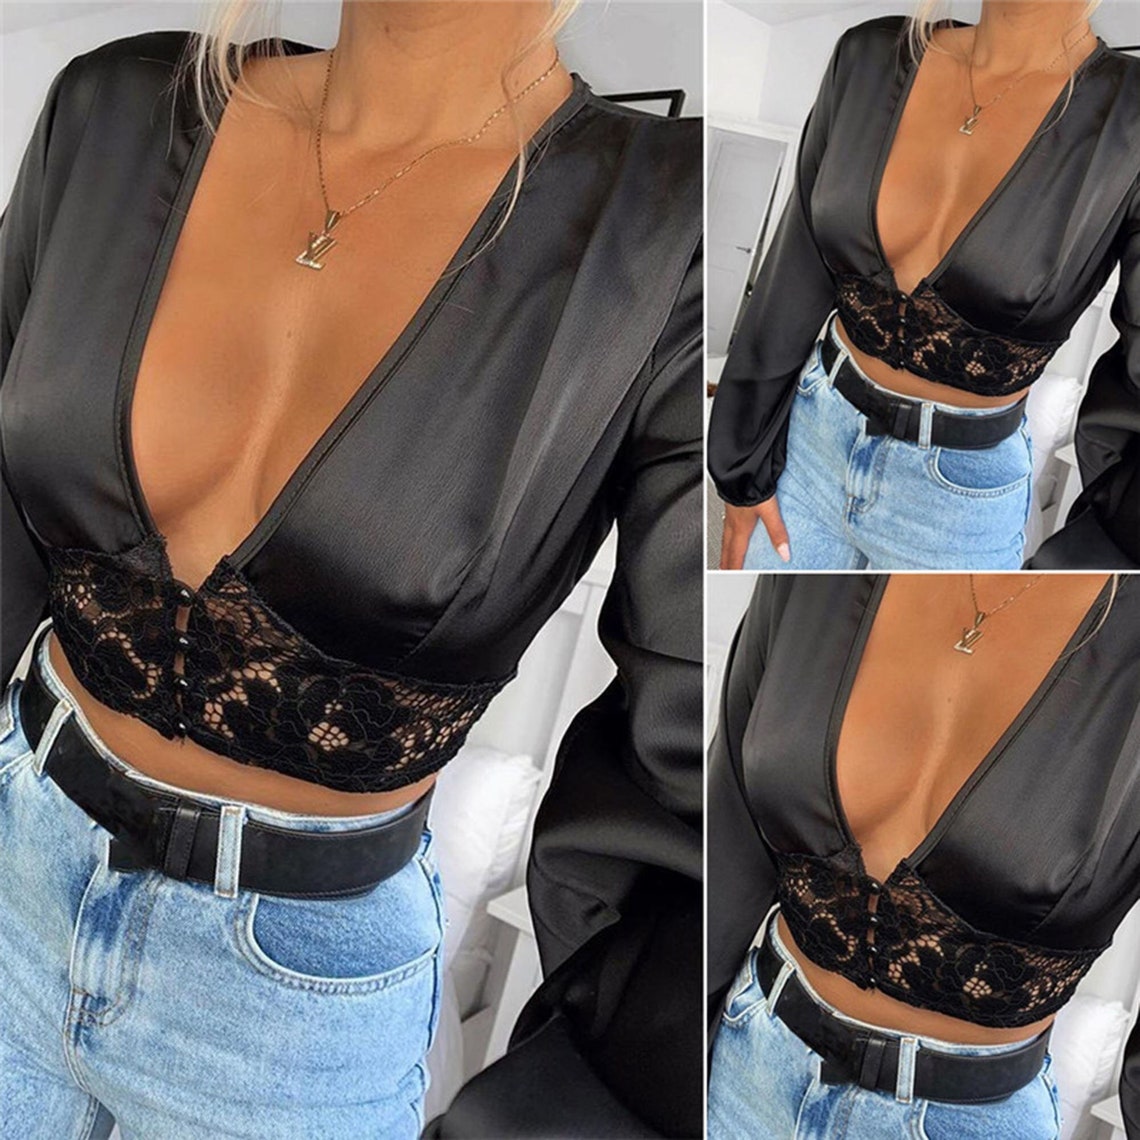 Deep V Neck Lace Floral Sexy Summer Mesh Sheer Blouse